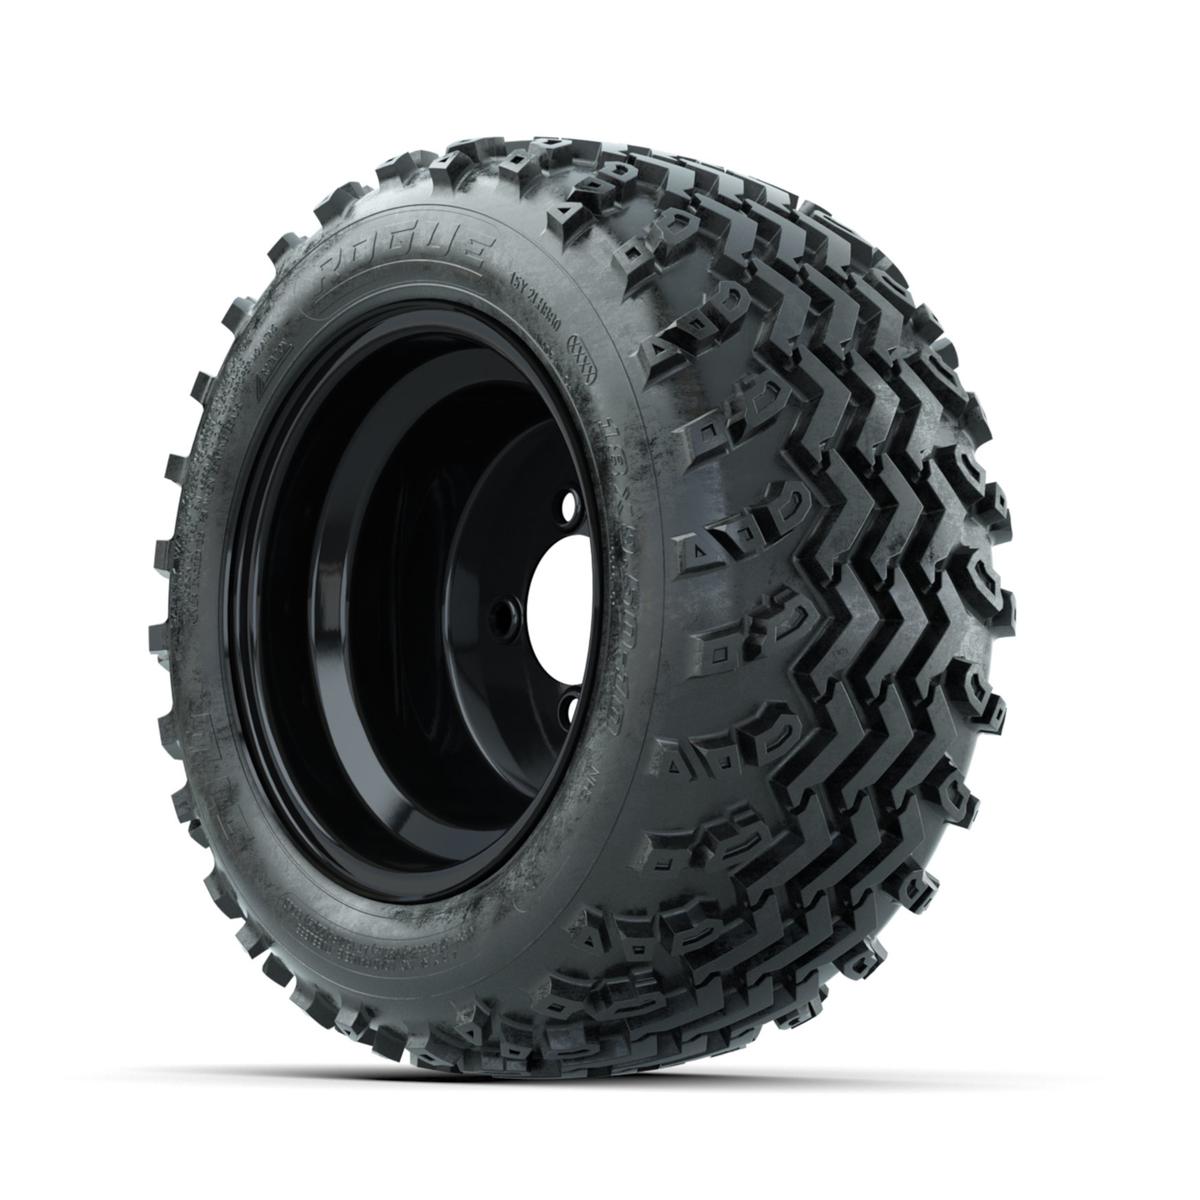 GTW Steel Black 10 in Wheels with 18x9.50-10 Rogue All Terrain Tires – Full Set